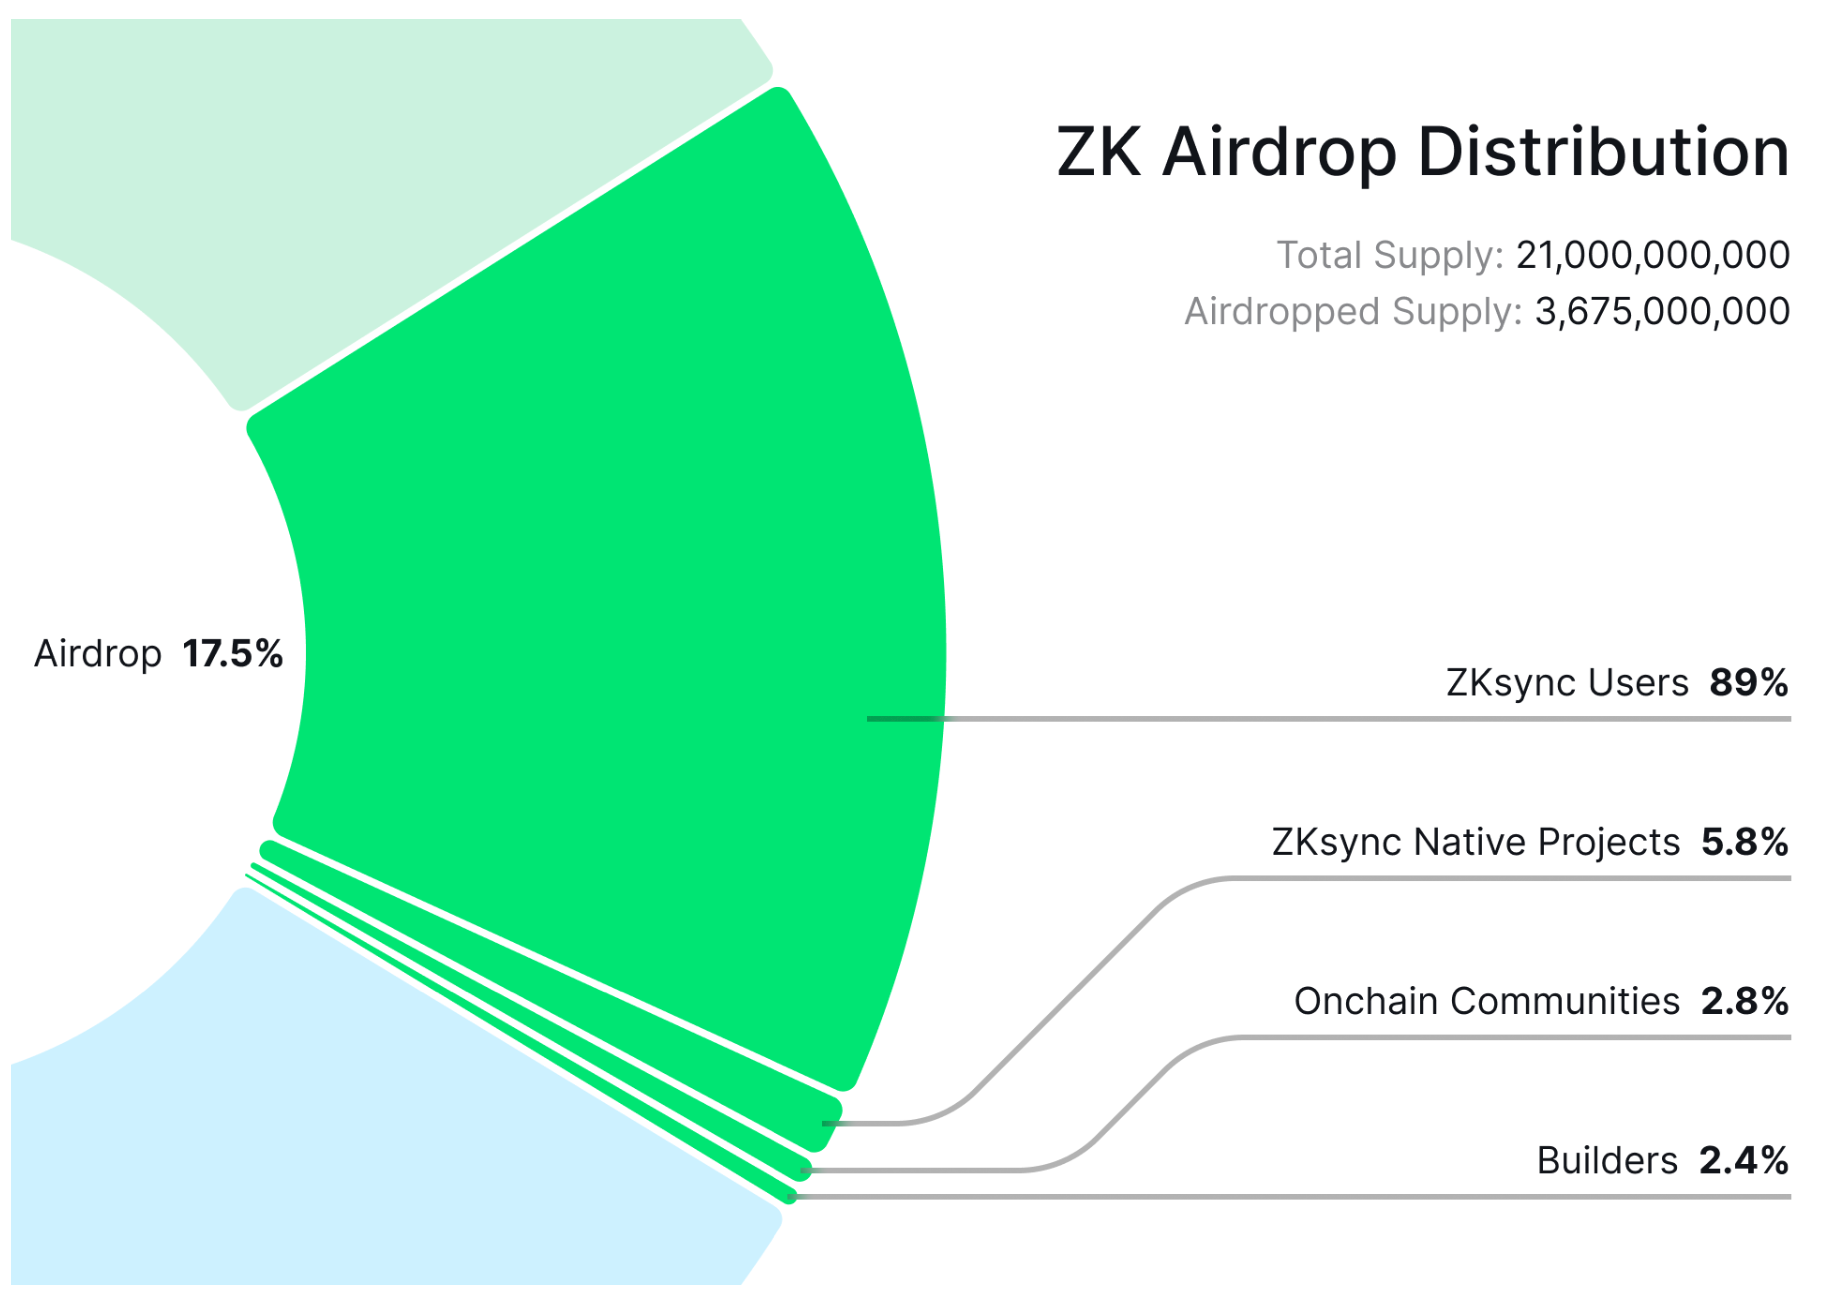 Zk Airdrop Distribution